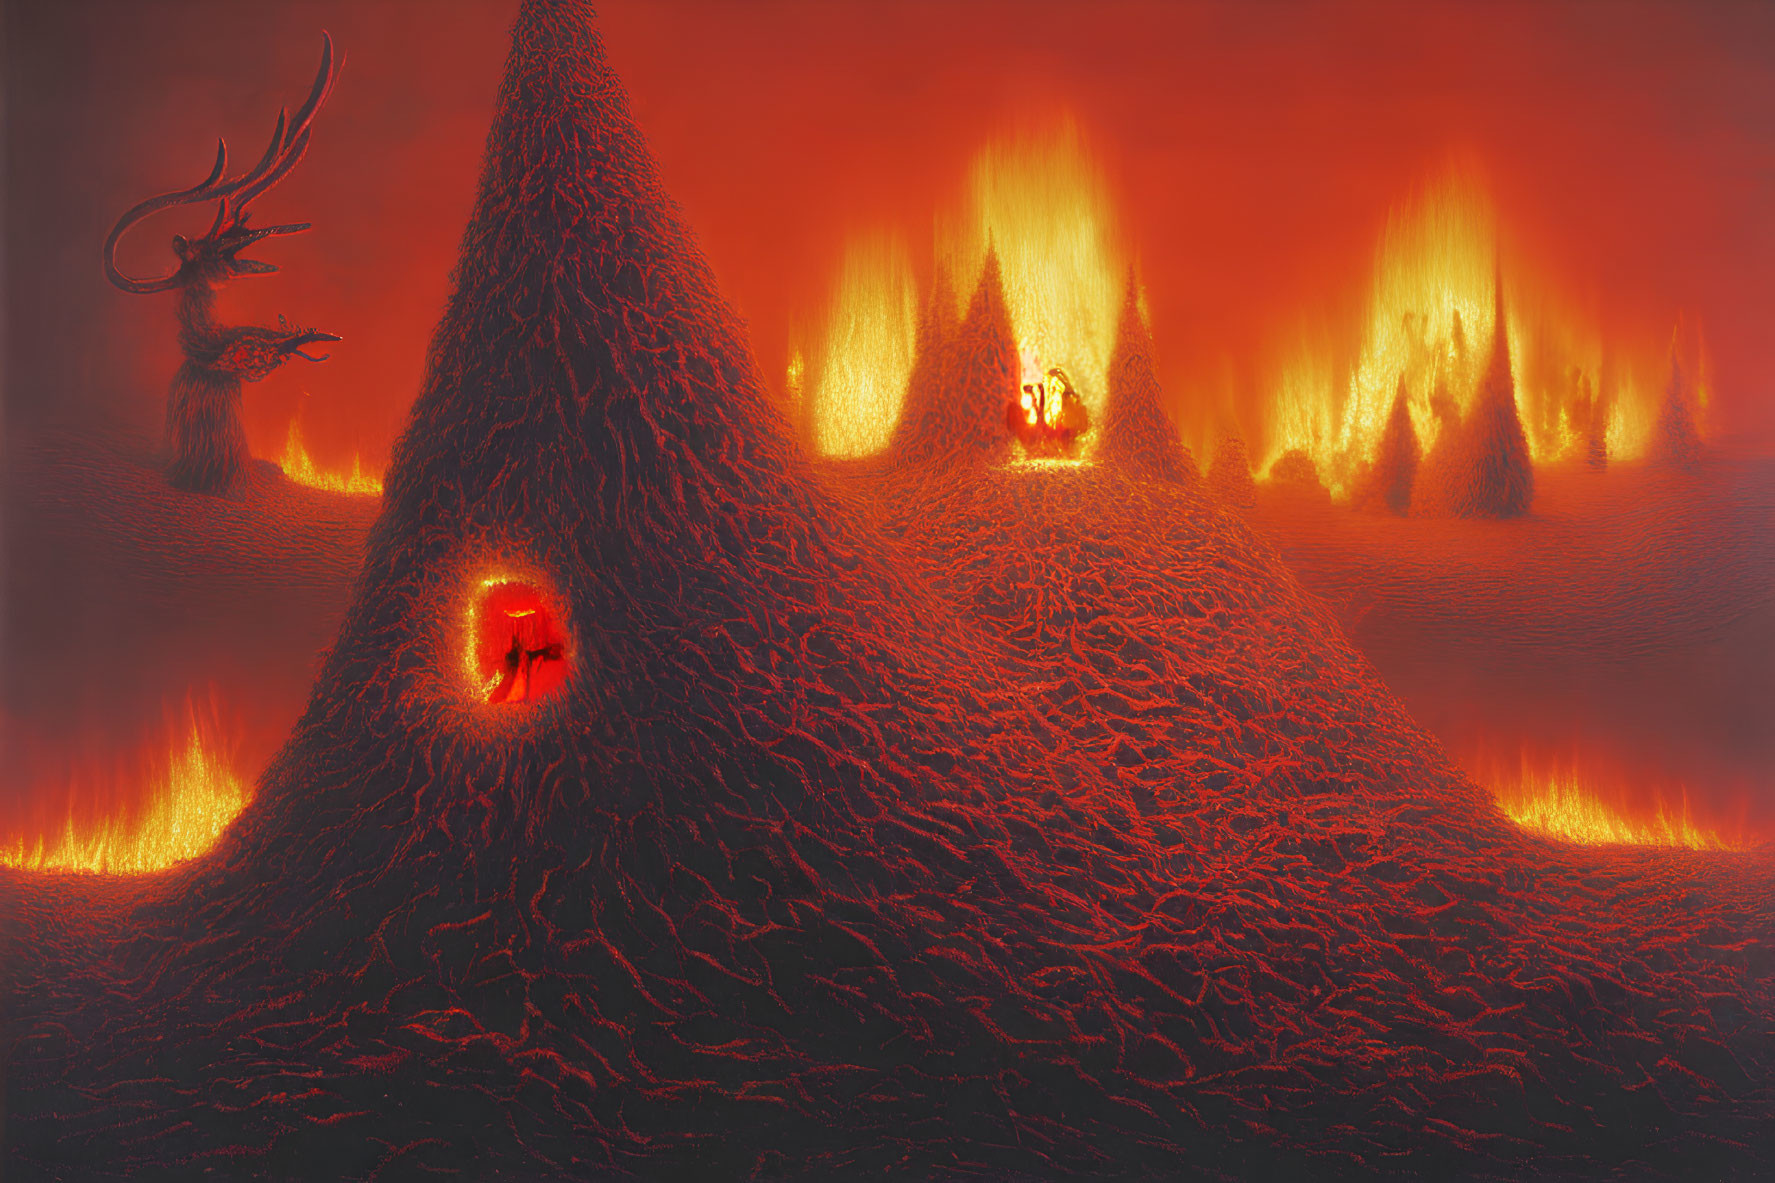 Volcanic landscape with lava flows and fiery eruptions in red-orange sky